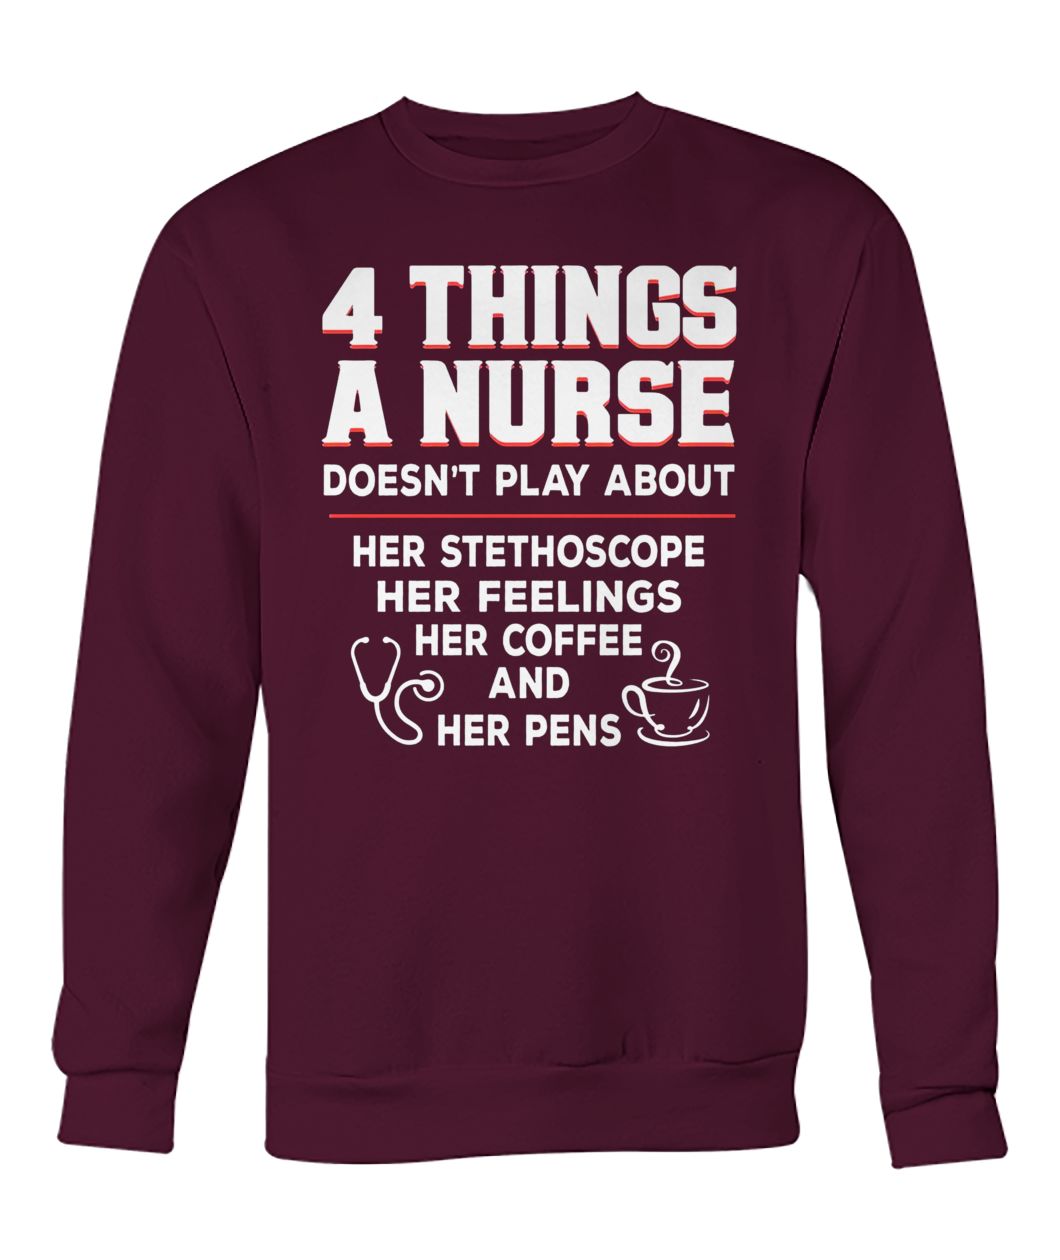 4 things a nurse doesn't play about her stethoscope crew neck sweatshirt